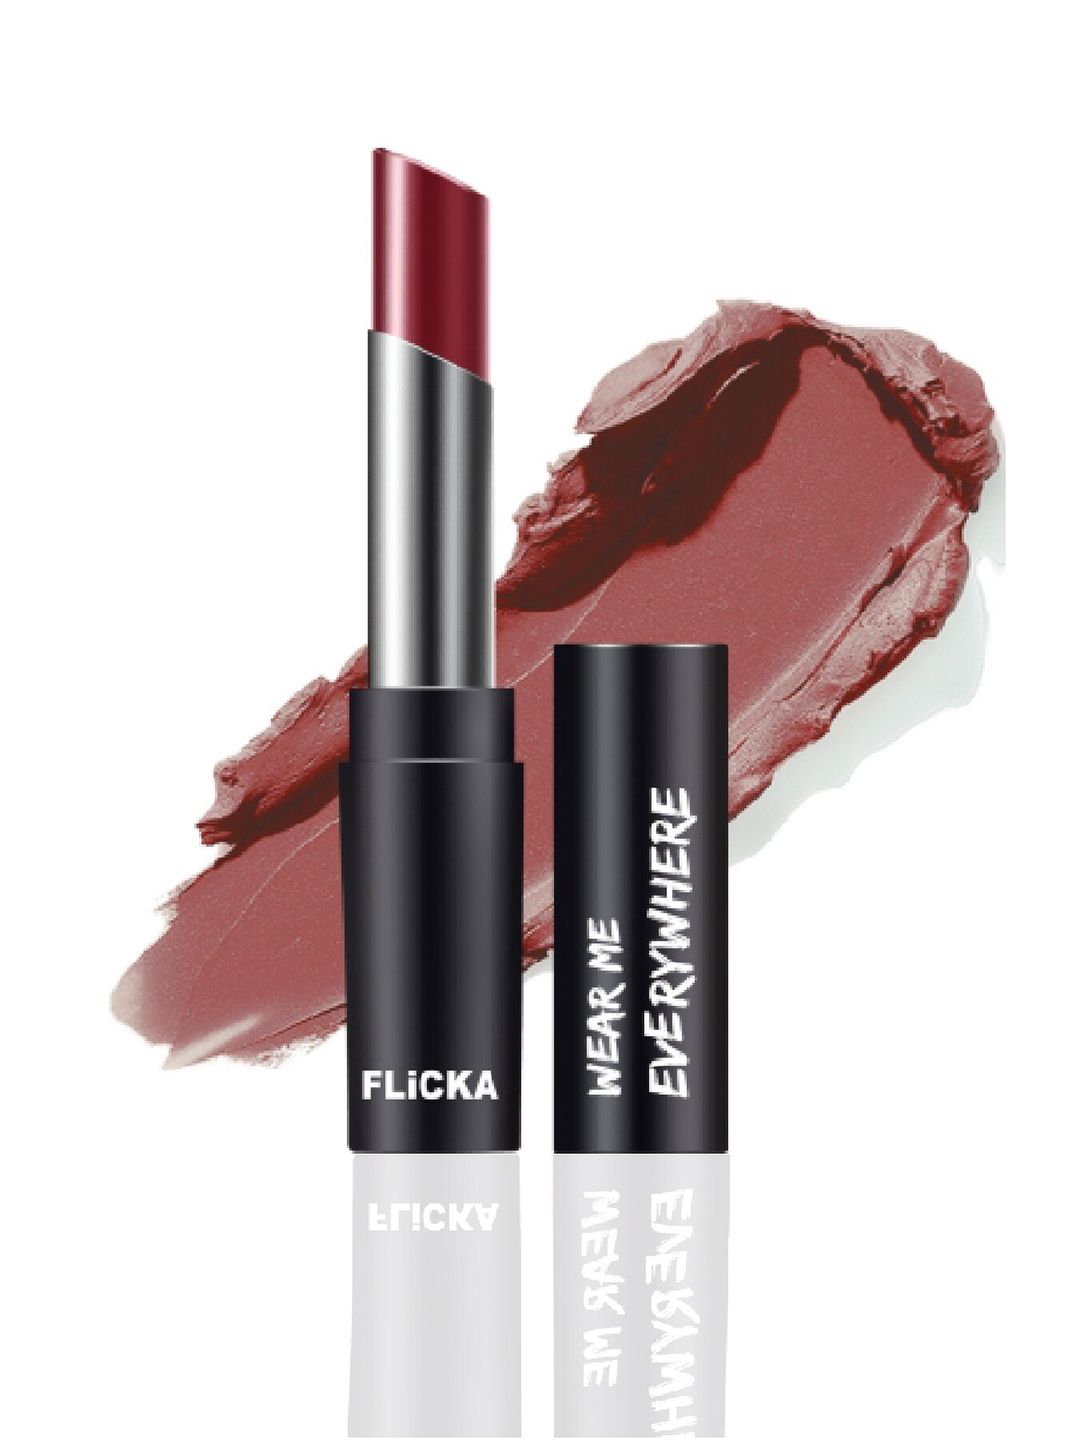 FLiCKA Wear Me Everywhere Creamy Matte Lipstick - Date With Coffee 25 Price in India